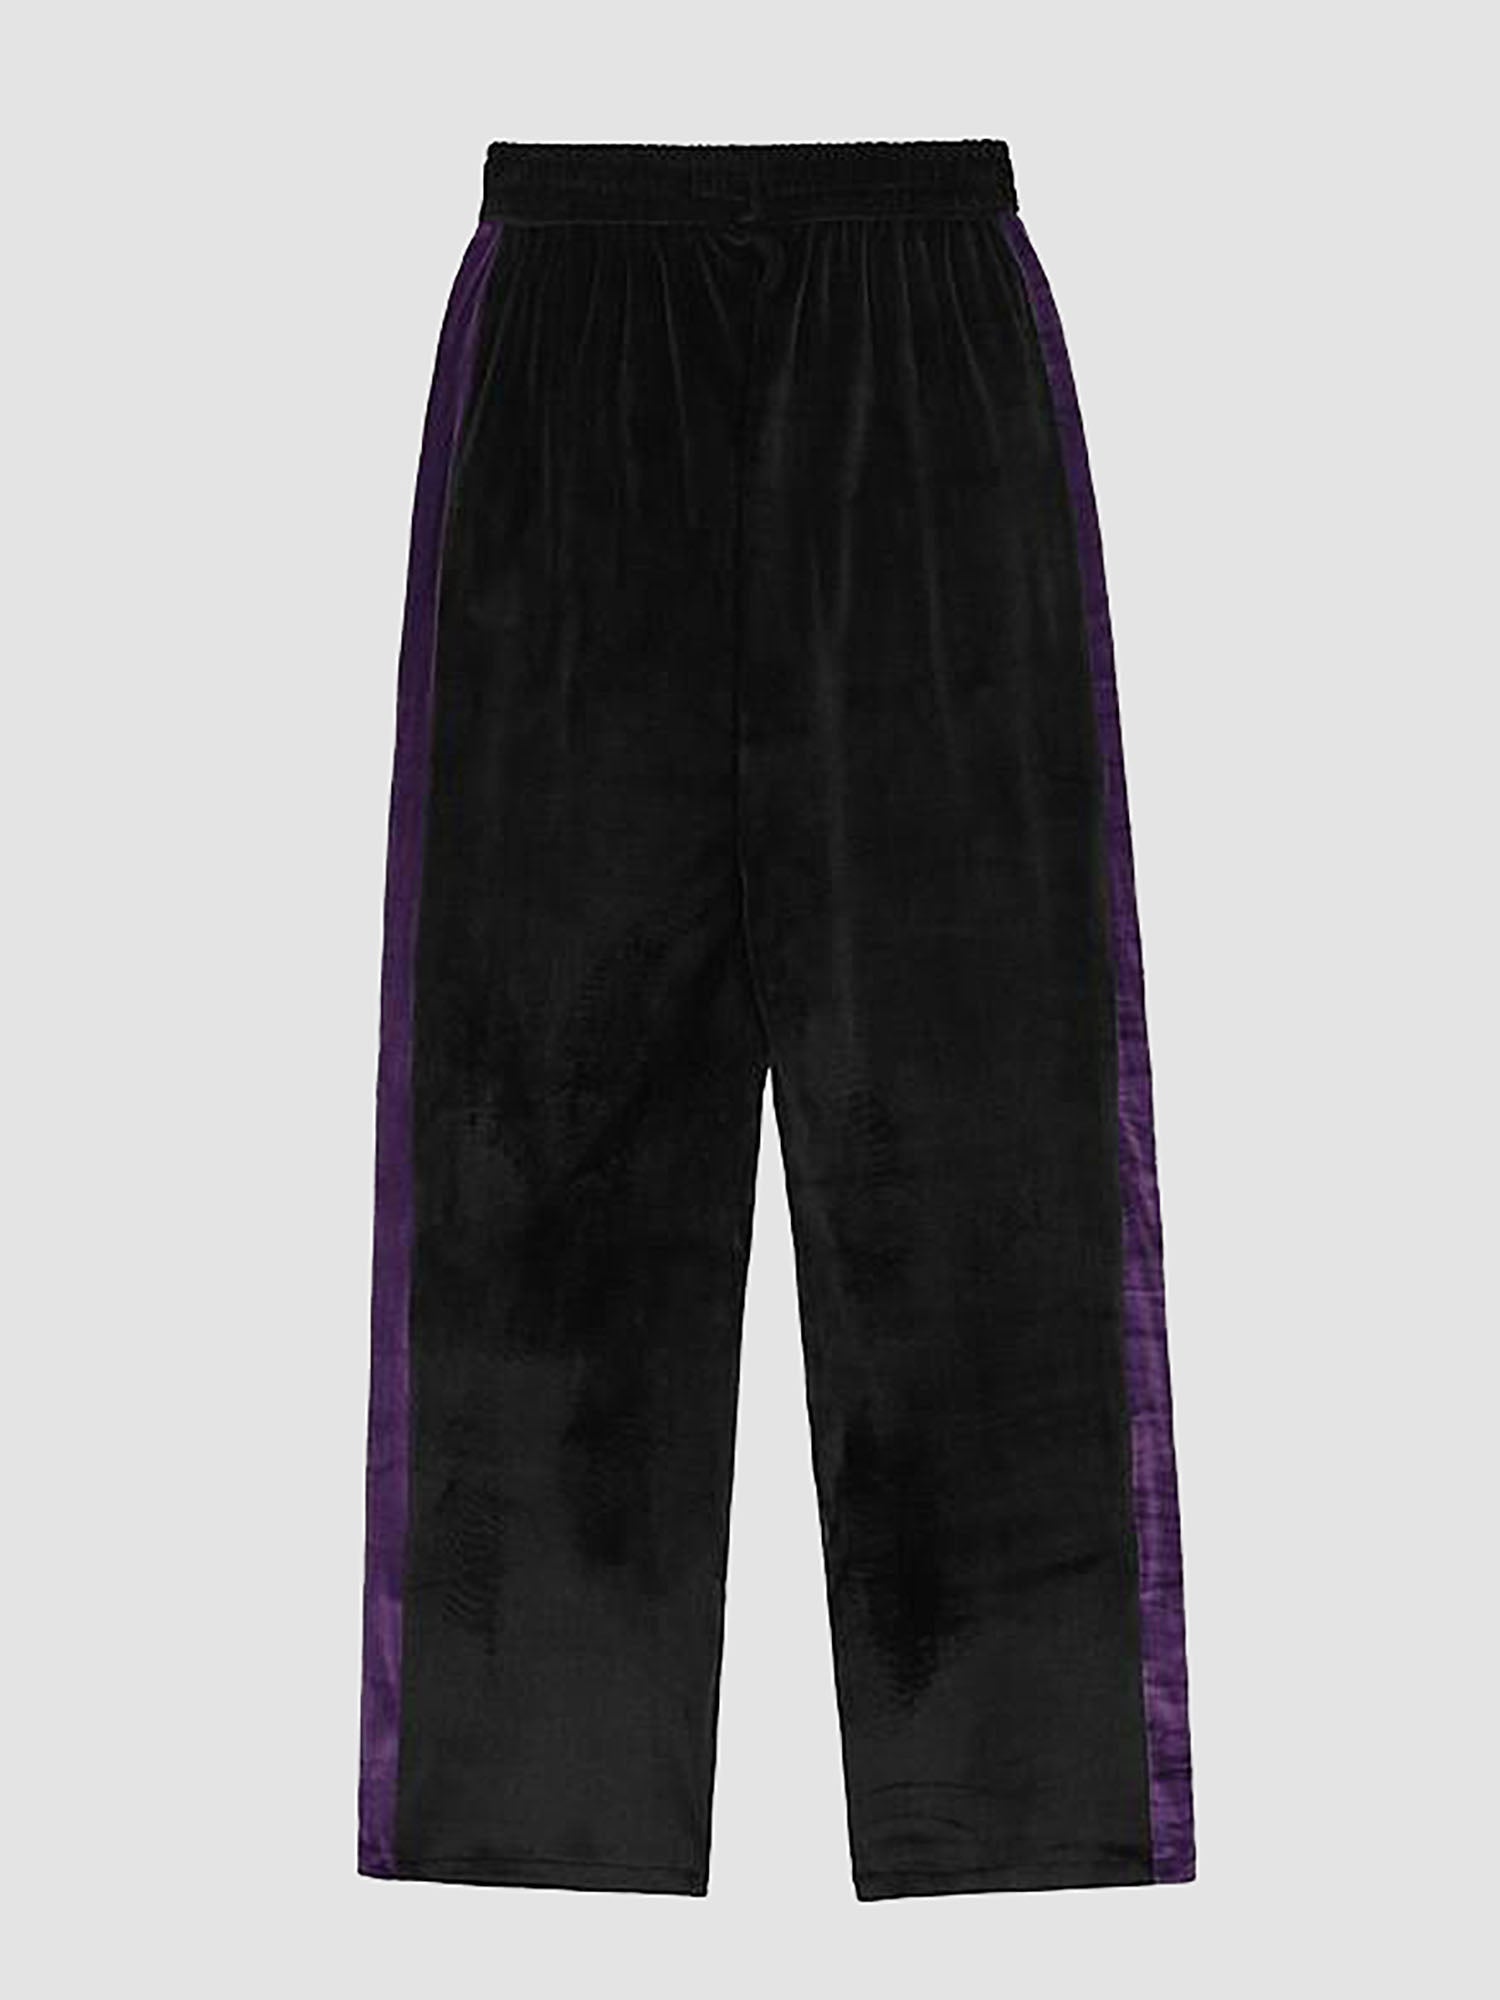 JUSTNOTAG Fashionable Embroidery Velvet Joggers